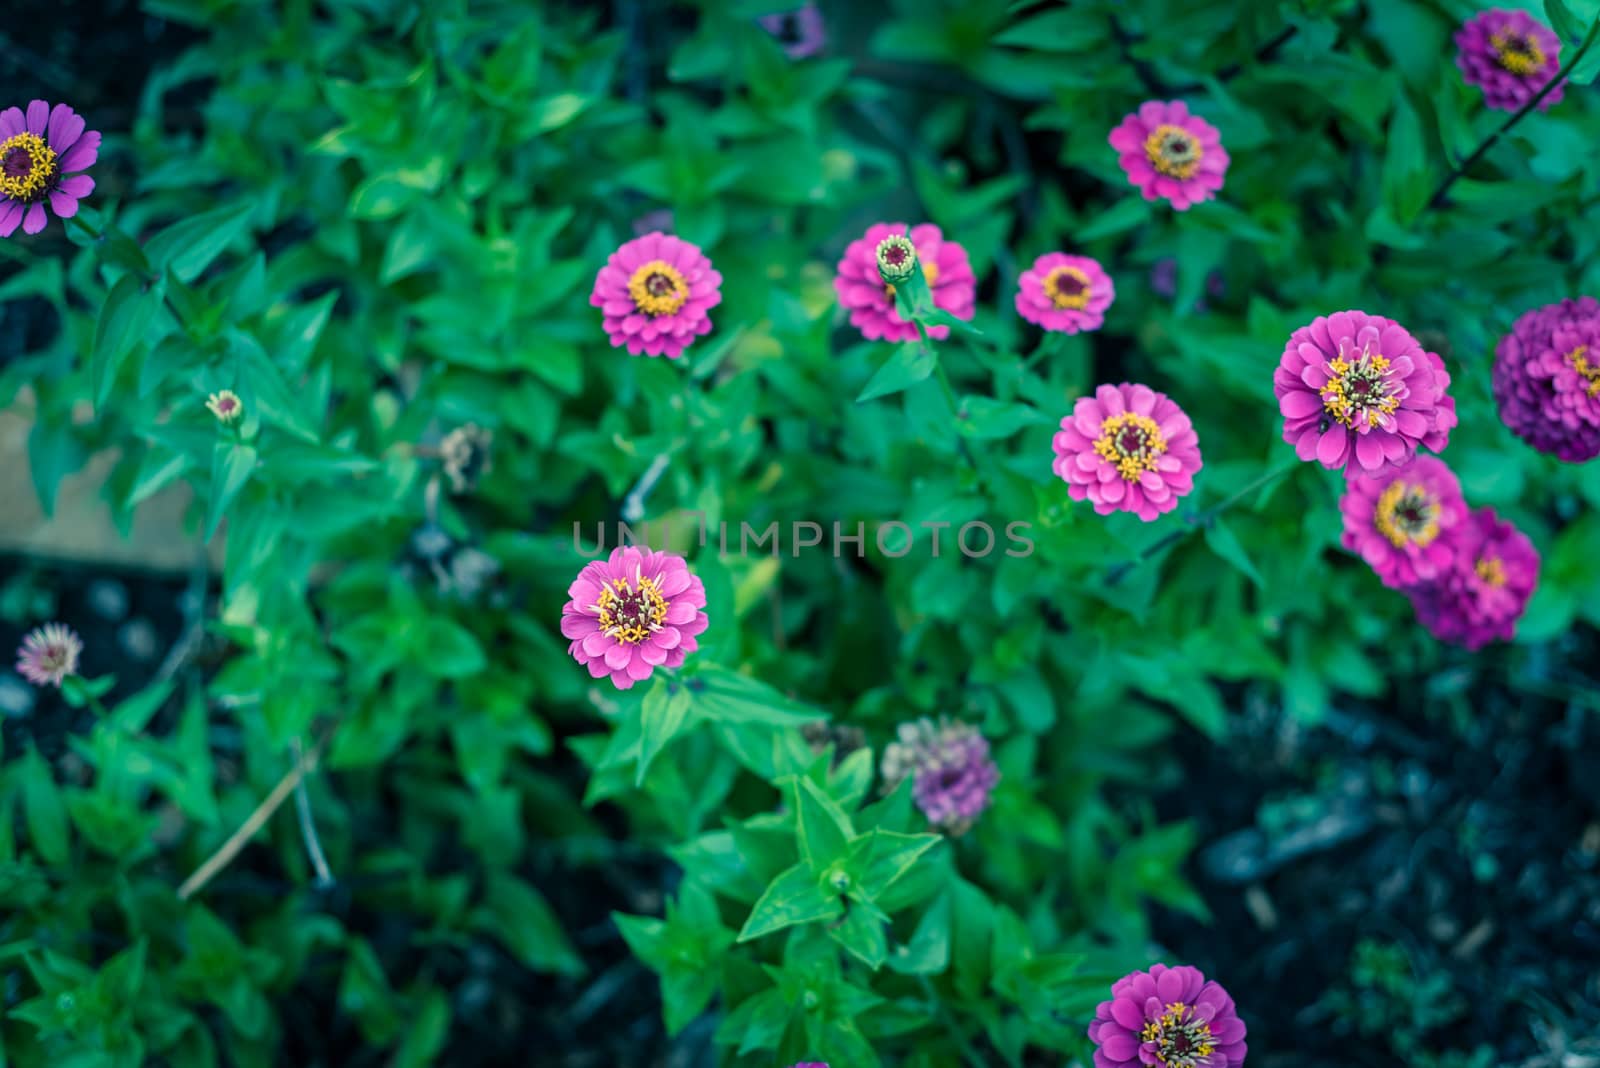 Blooming violet zinnia bush at flower bed in community allotment near Dallas, Texas, USA by trongnguyen